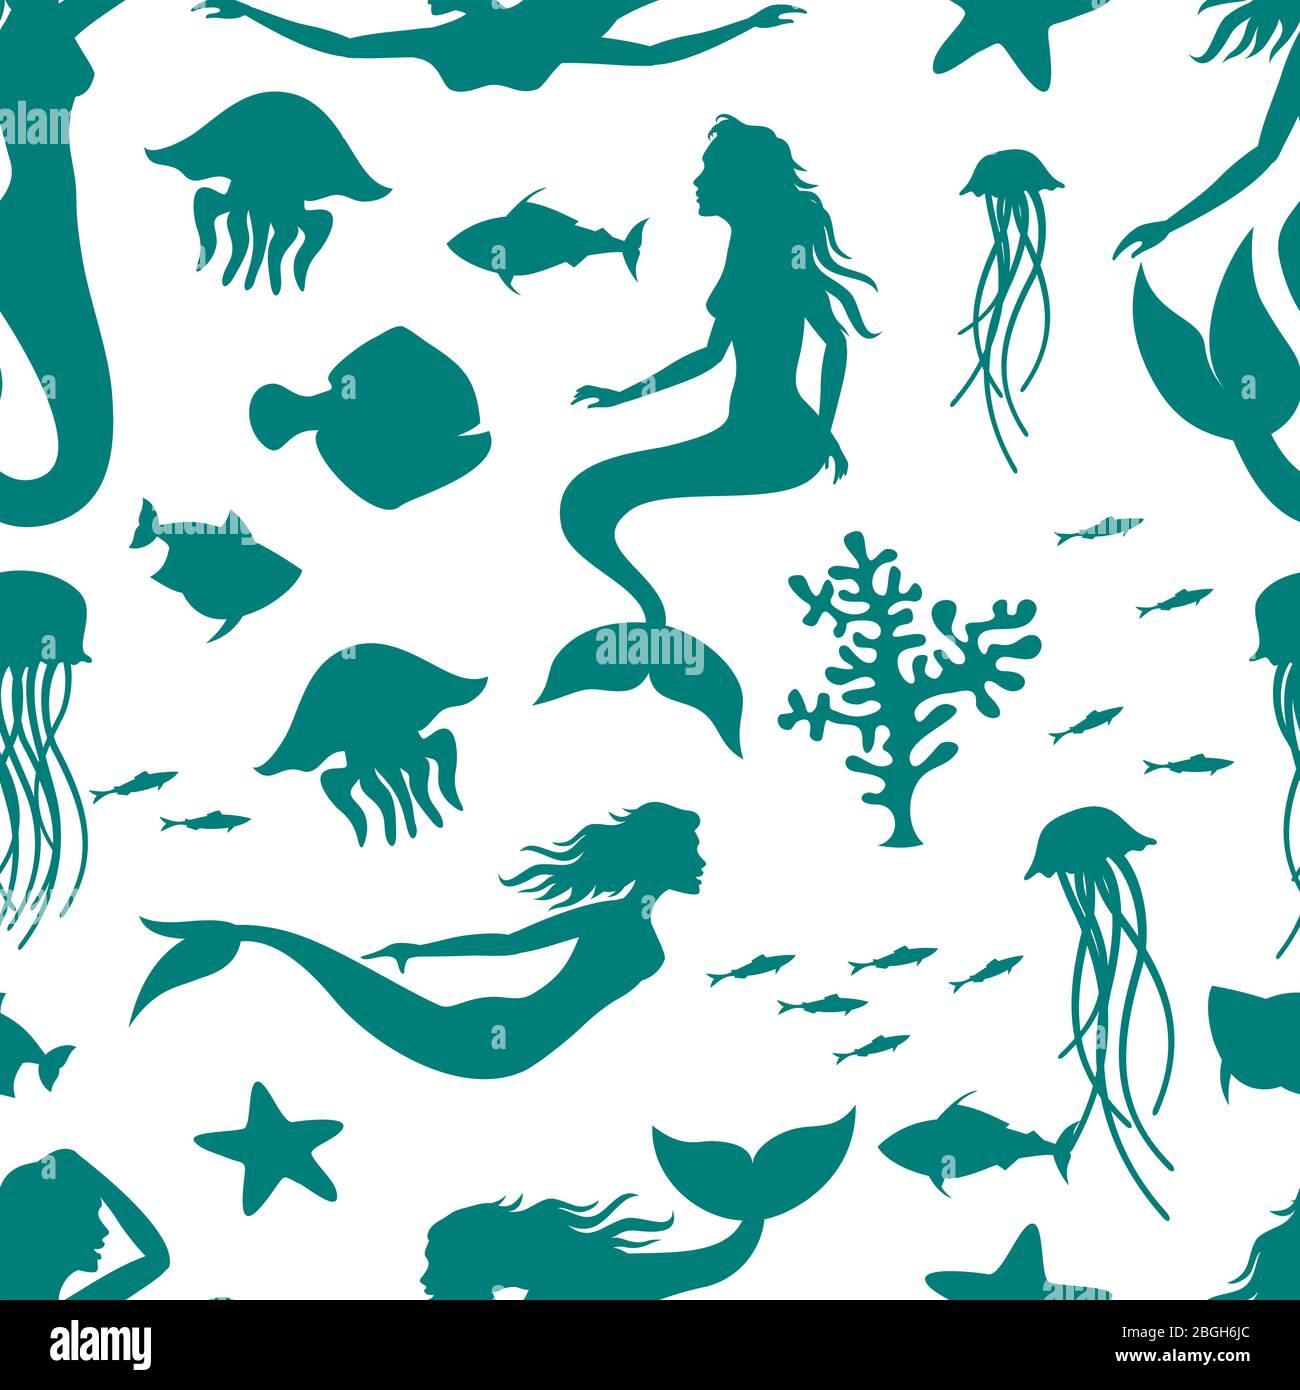 Underwater world seamless background pattern. Mermaid and fishes seamless texture. Vector illustration Stock Vector